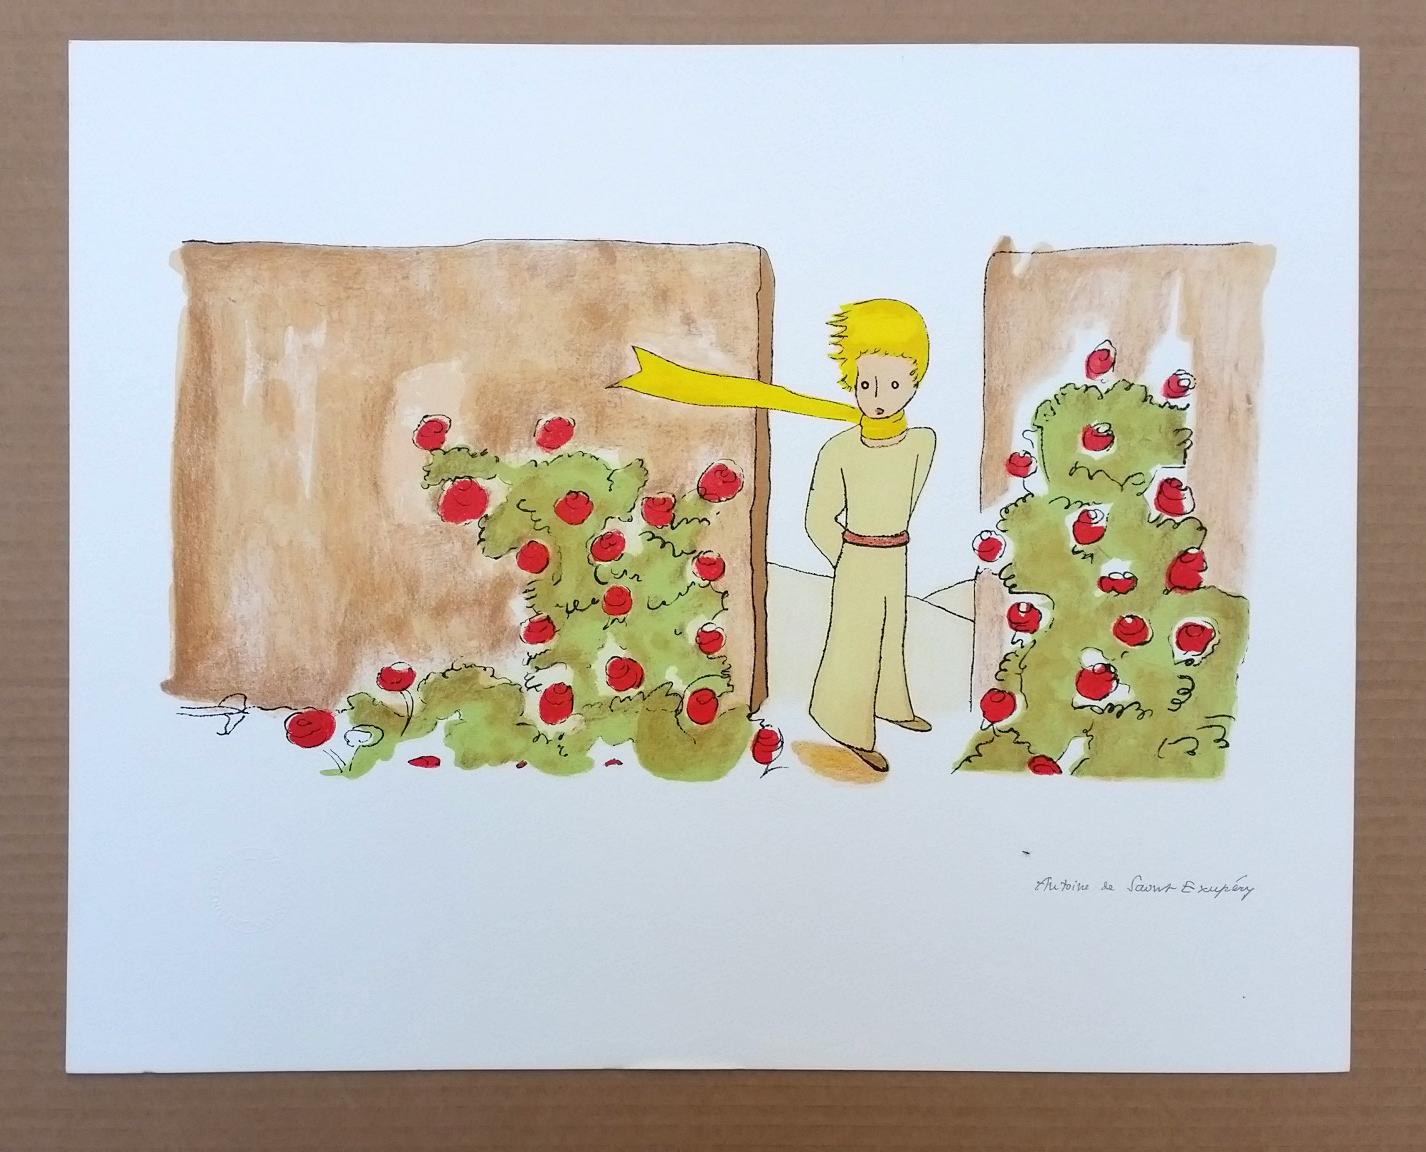 The Little Prince in the Rose Garden L - Print by Antoine de saint Exupery